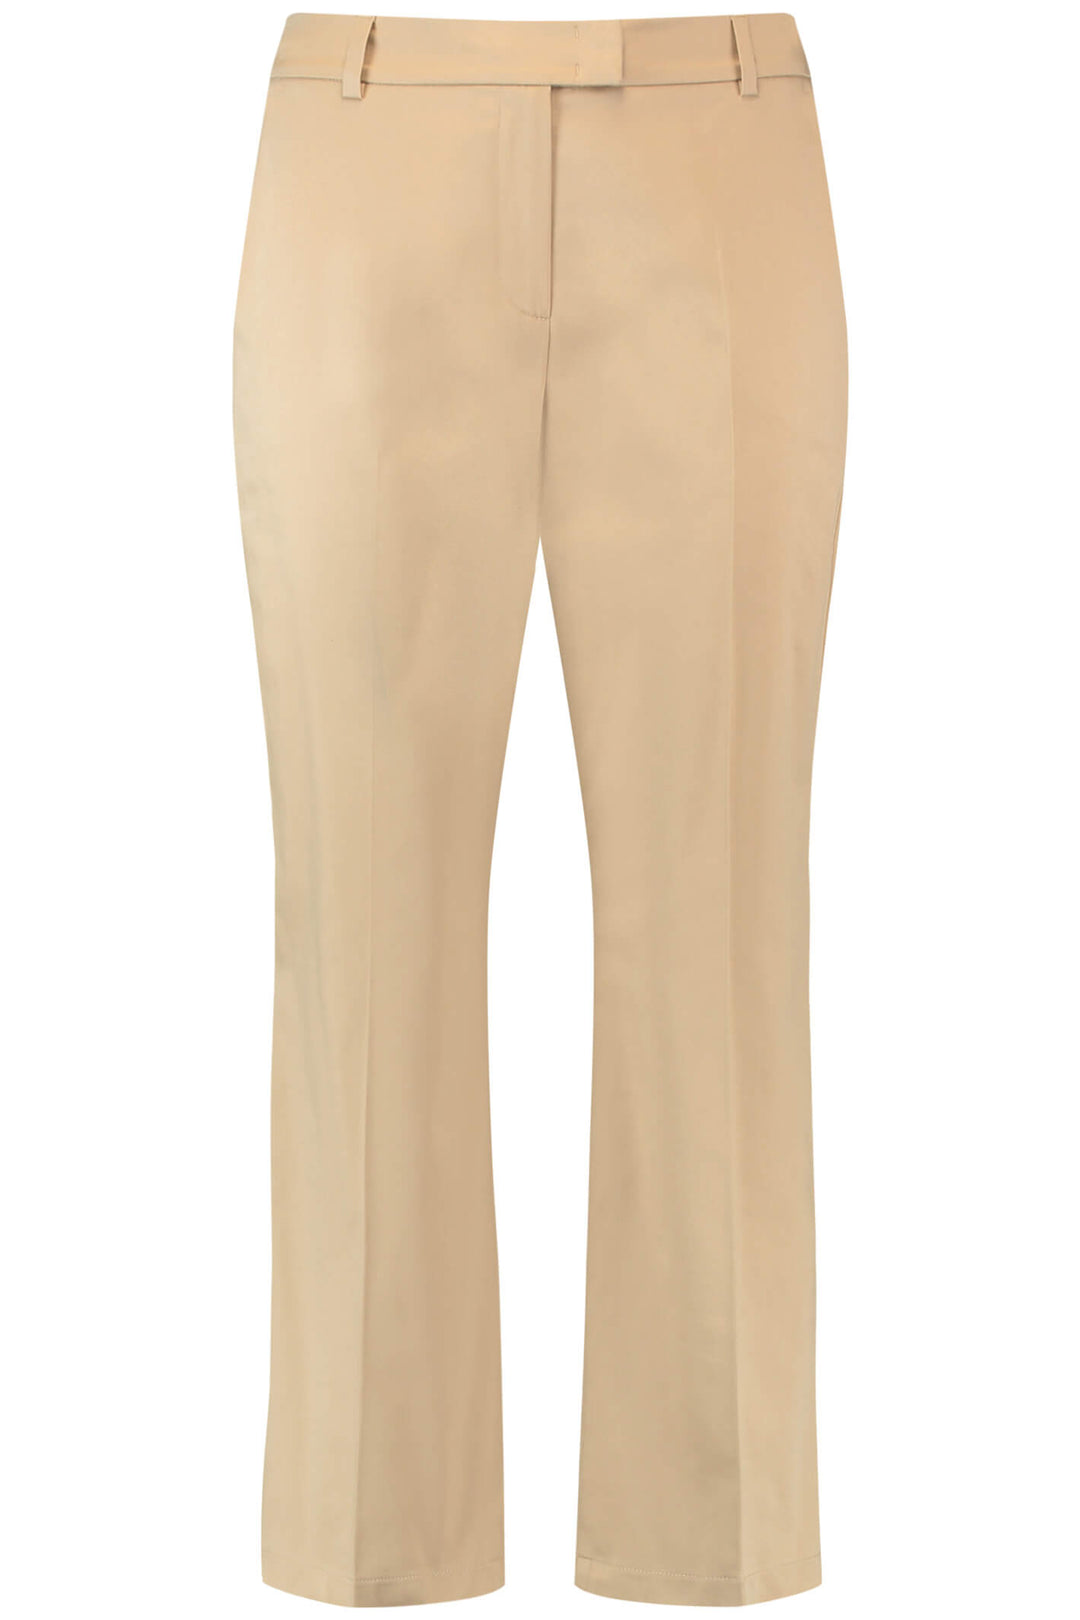 Gerry Weber 120020 Caramel Trousers - Experience Boutique